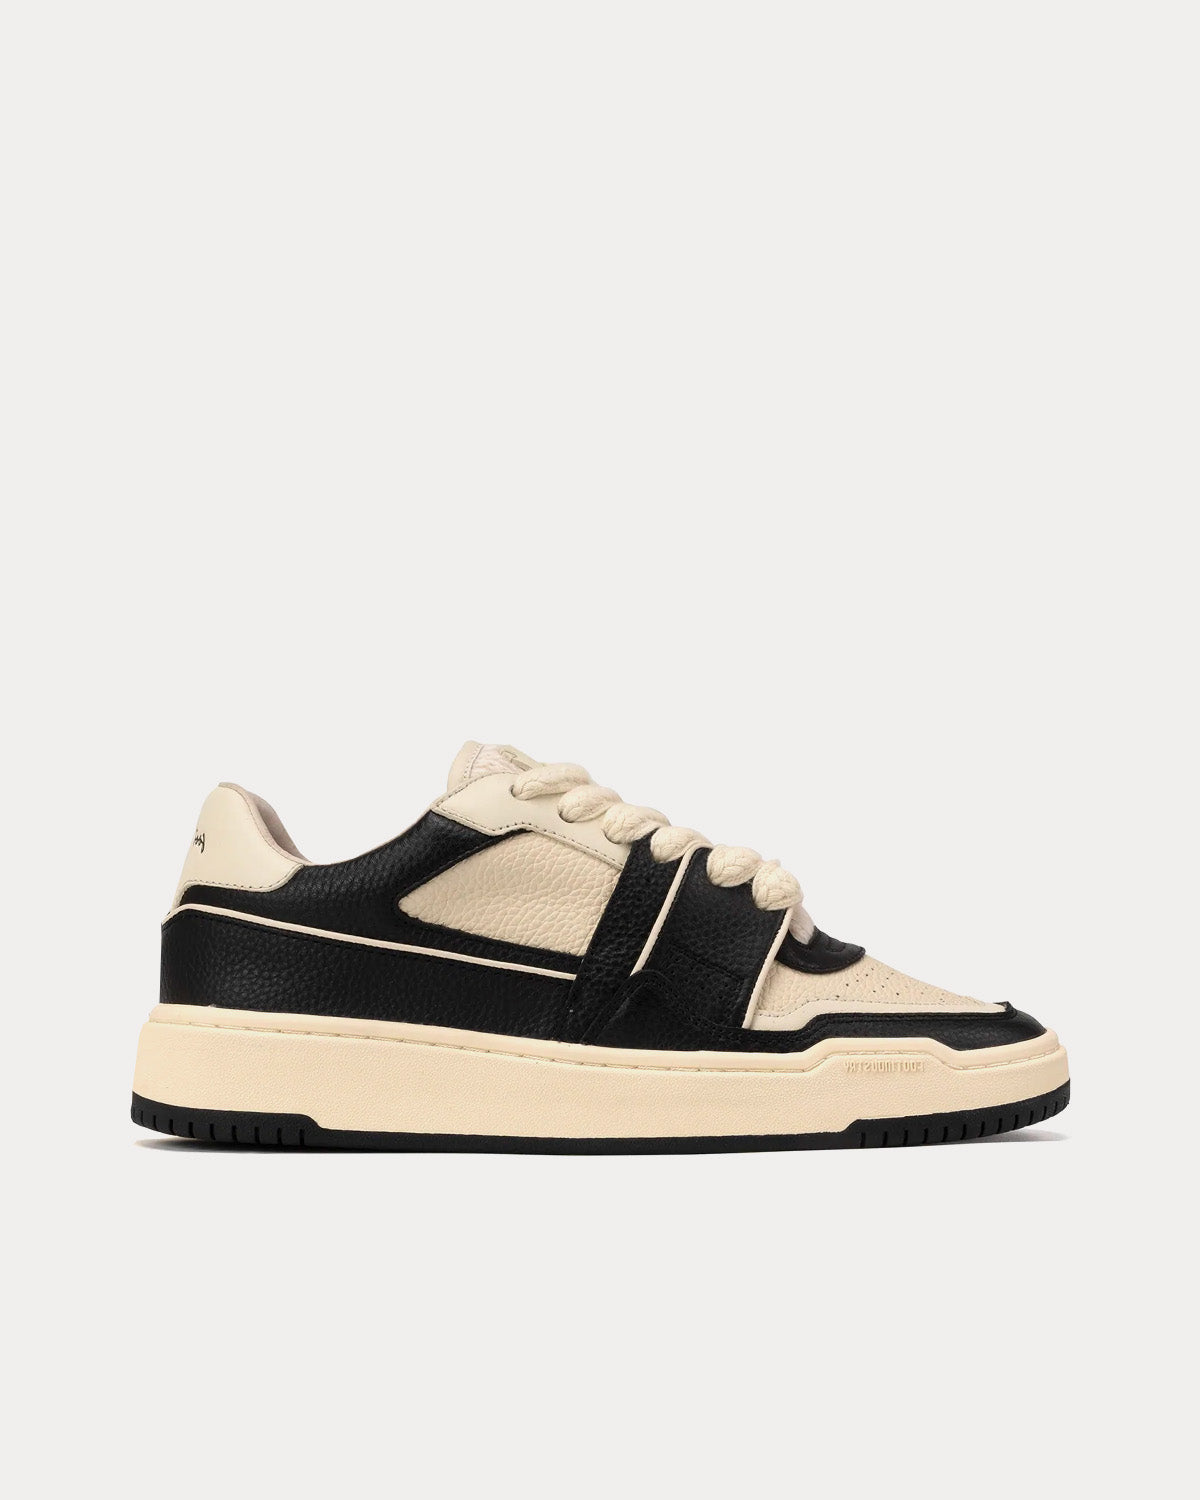 Foot Industry - 2023 s/s AUA405-004 Off-White / Black Low Top Sneakers